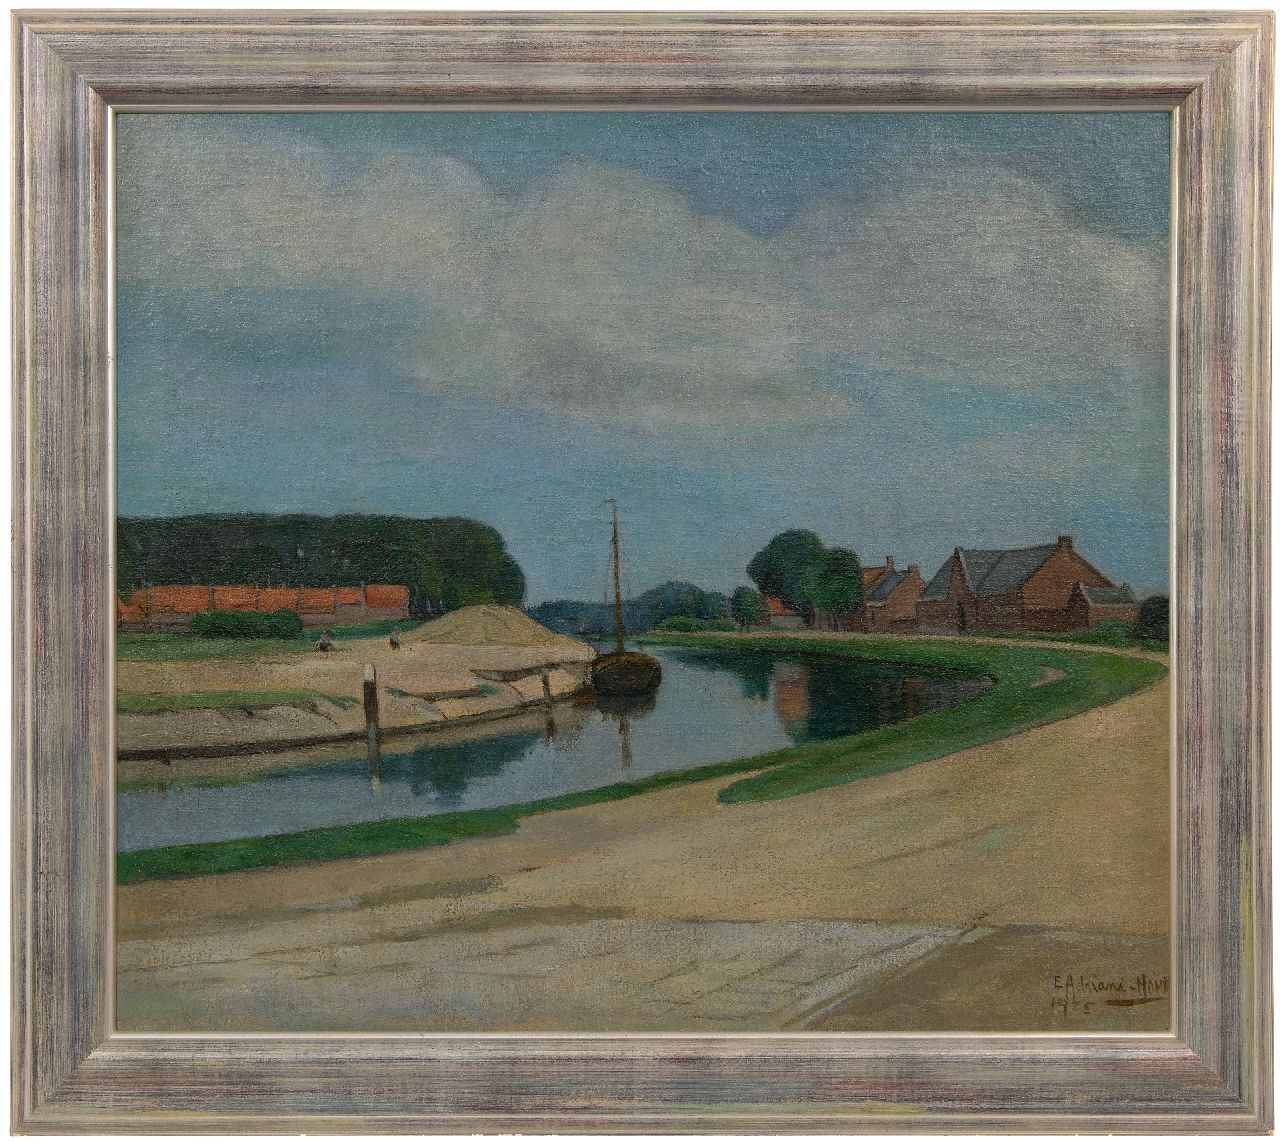 Adriani-Hovy E.M.H.  | 'Elisabeth' Marie Hendrika Adriani-Hovy | Paintings offered for sale | The river Vecht near Oud-Zuilen, oil on canvas 70.2 x 80.0 cm, signed l.r. and dated 1925